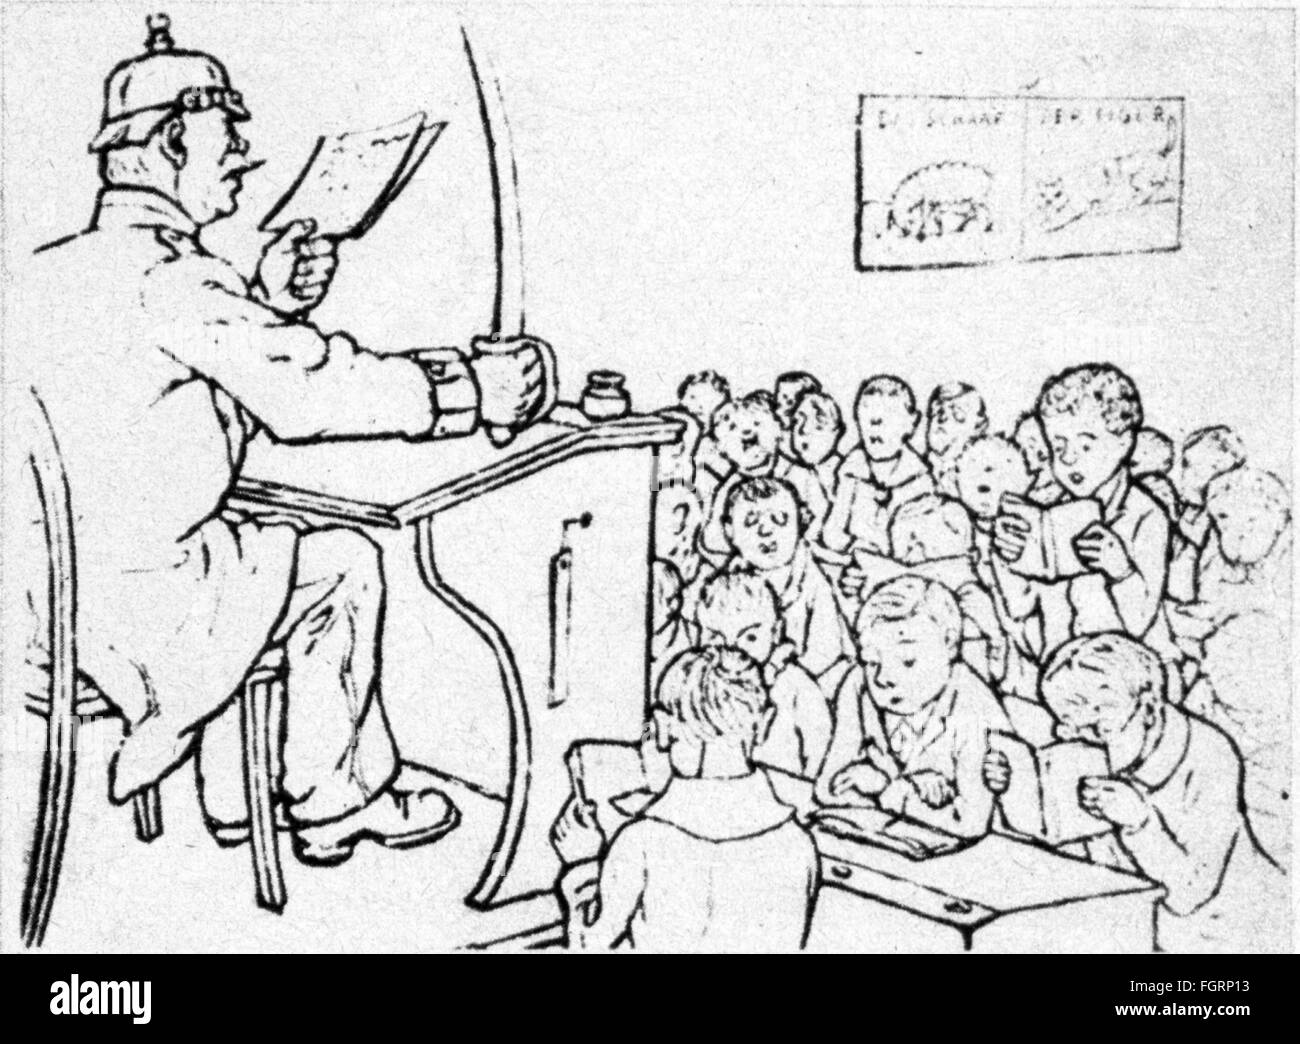 pedagogy, caricature, policeman as teacher in Imperial Germany, drawing, circa 1900, Additional-Rights-Clearences-Not Available Stock Photo